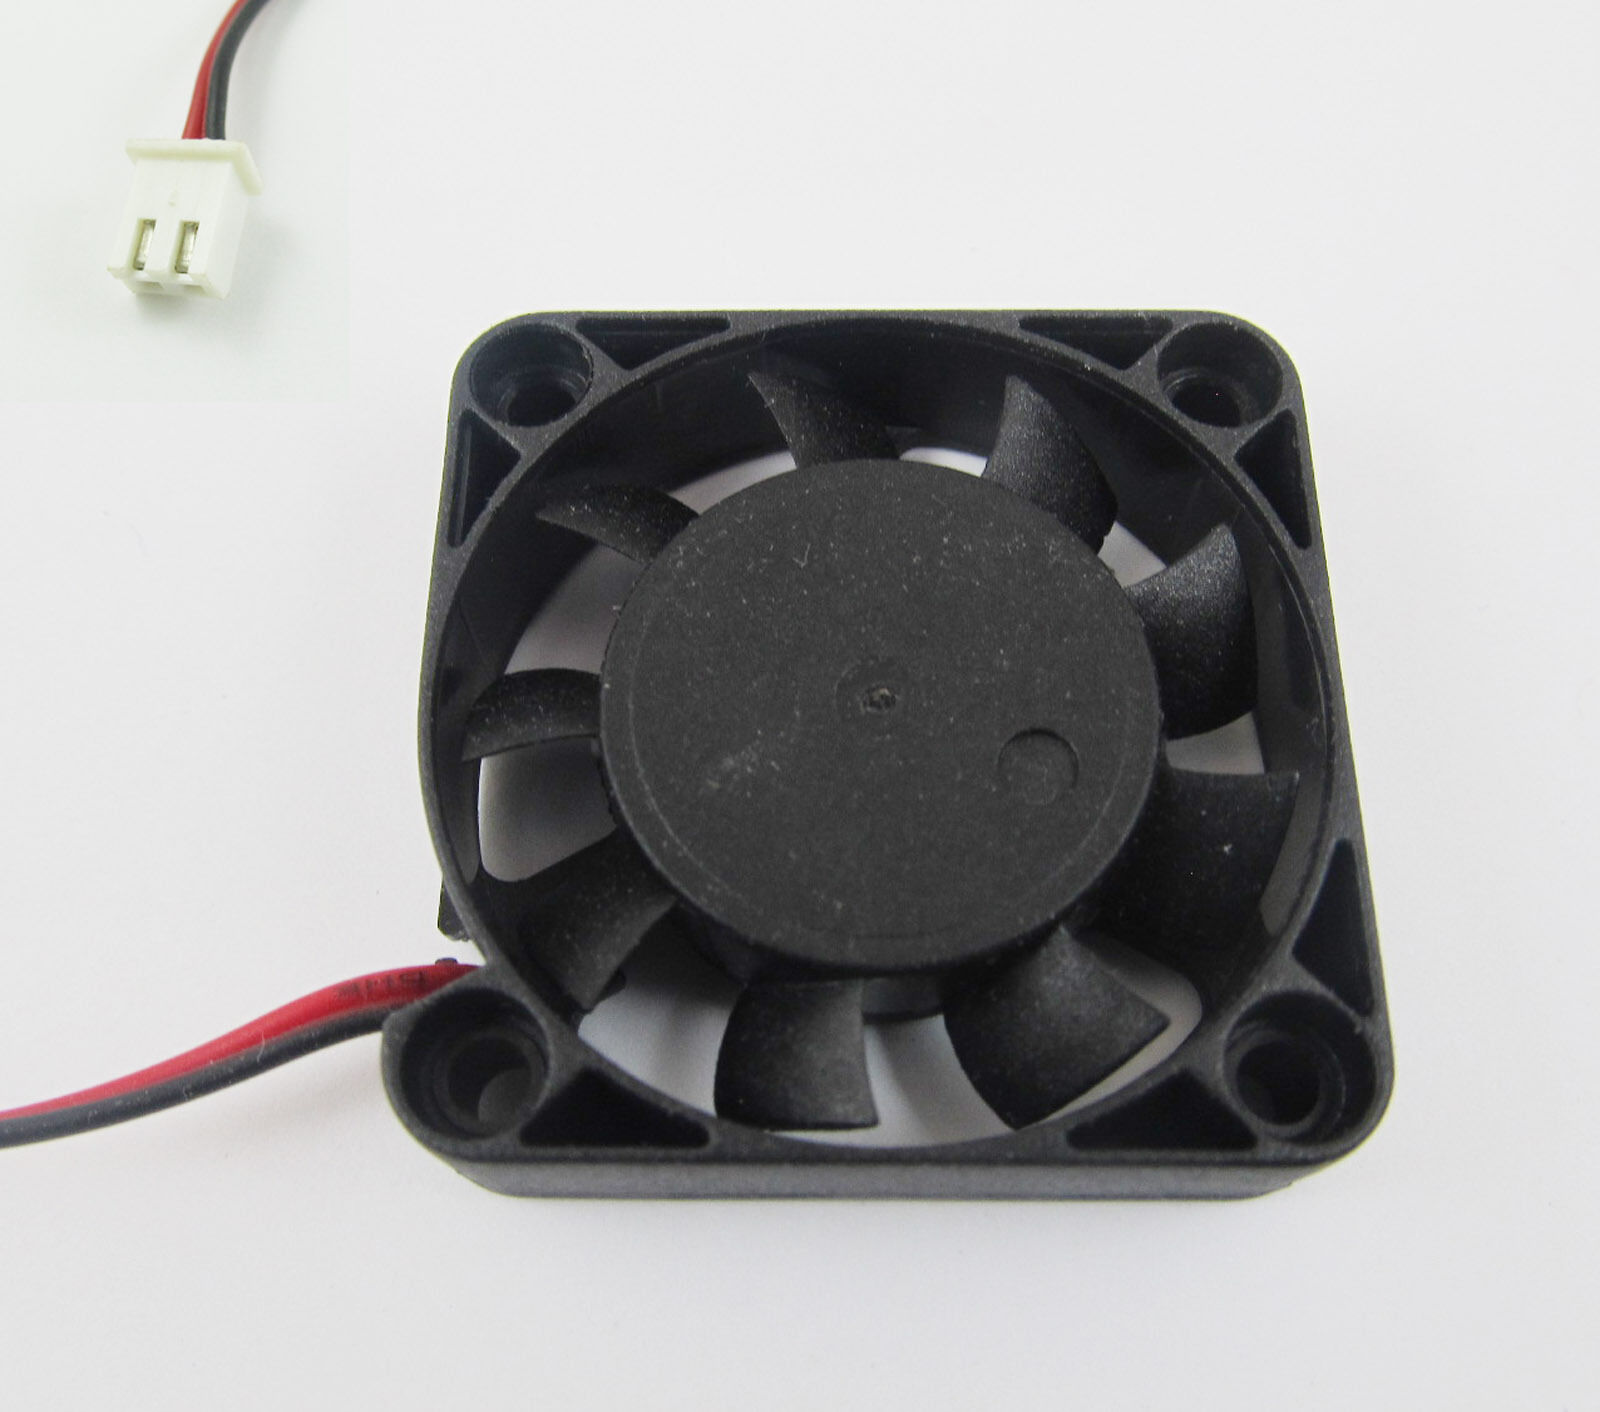 10pcs Brushless NEW before selling DC Cooling Fan 9 10mm 40mm New sales x Blade 24V